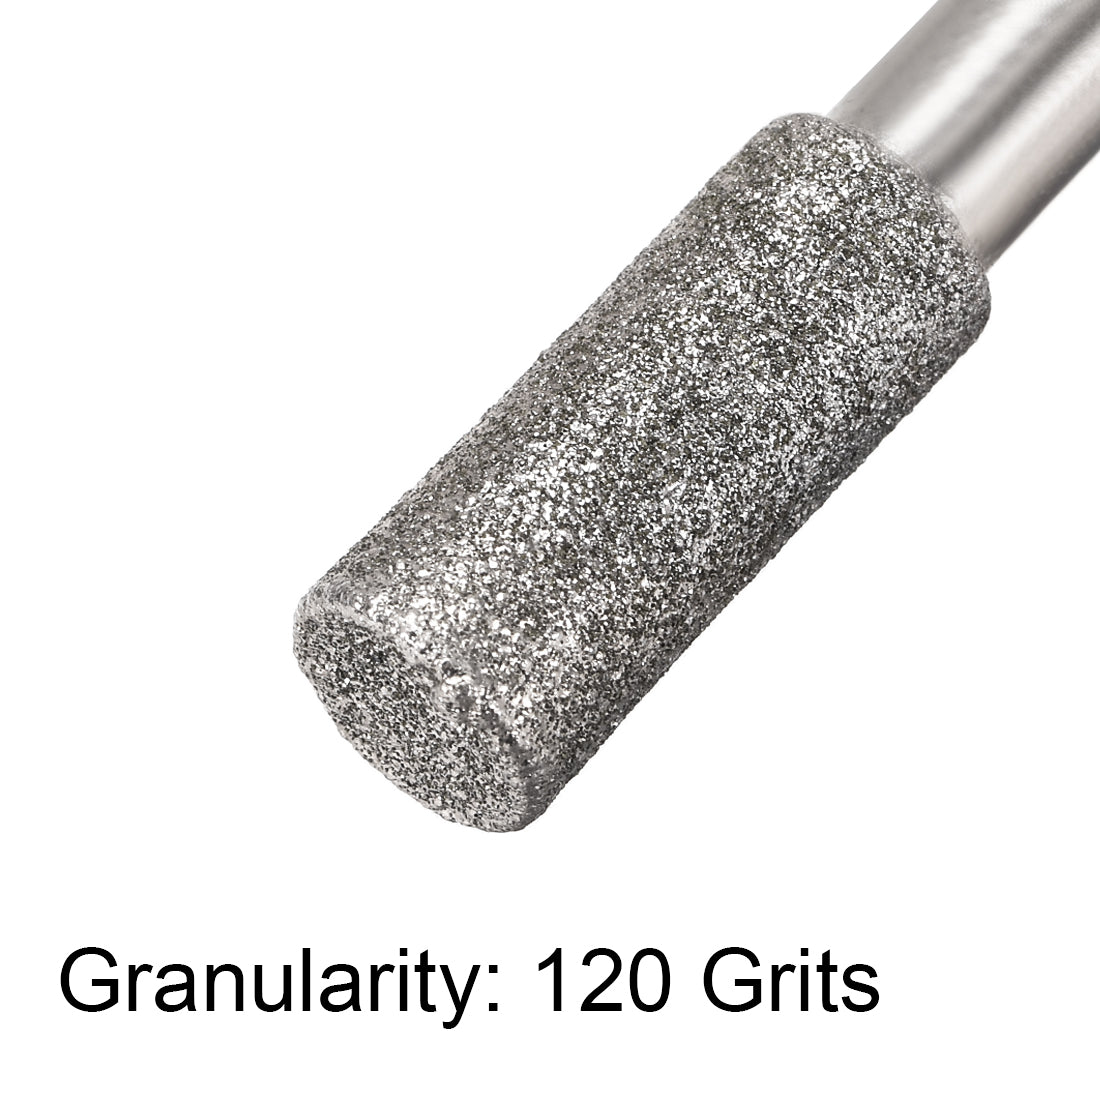 Uxcell Uxcell Diamond Burrs Bits Grinding Drill Carving Rotary Tool for Glass Stone Ceramic 120 Grit 1/4" Shank 8mm Cylinder 5 Pcs